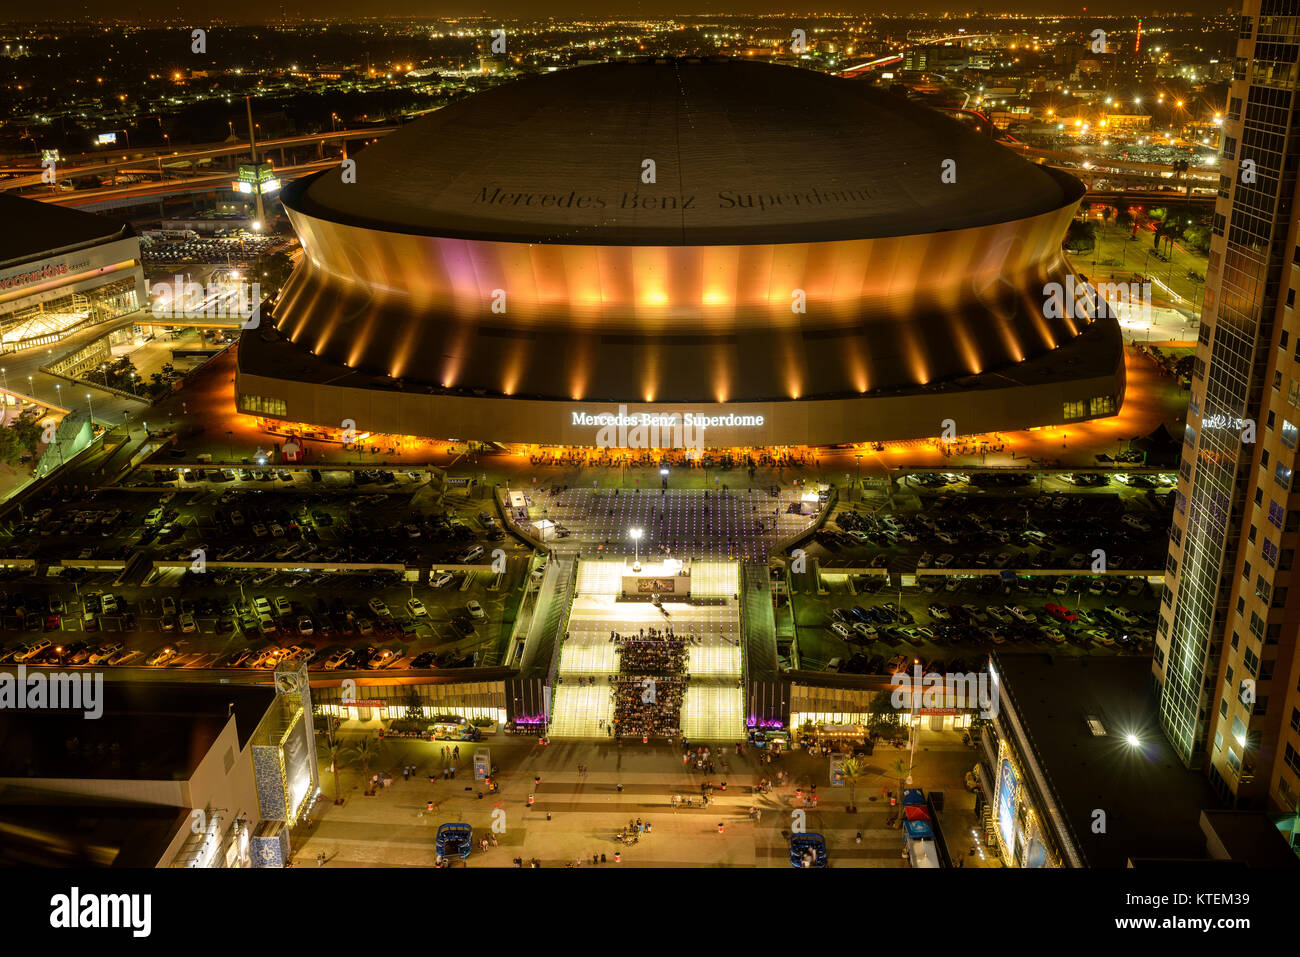 Superdome at Night - On the night of NFL Sunday Night game Green Bay Packers vs. New Orleans Saints, Mercedes-Benz Superdome is lit up by neon lights. Stock Photo